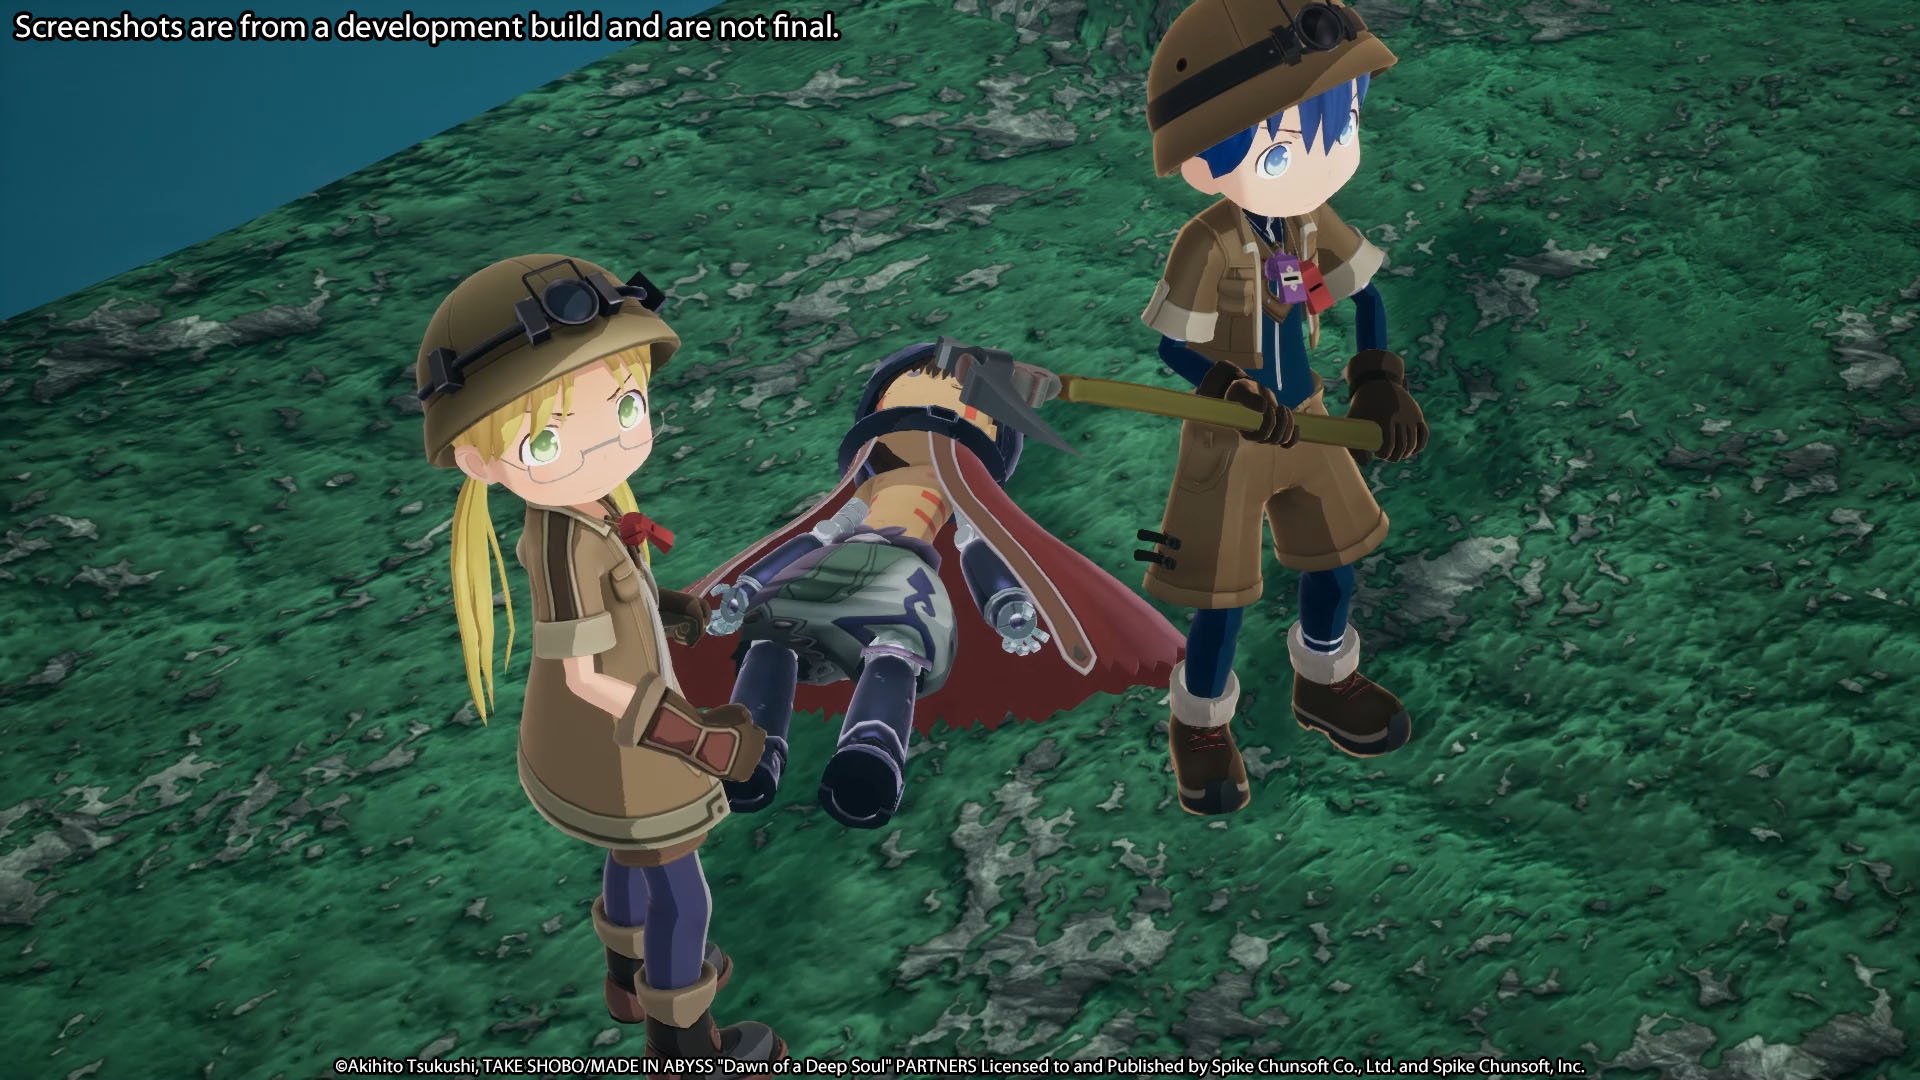 Made in Abyss: Binary Star Falling into Darkness Reveals Character Profiles  & Cast - QooApp News